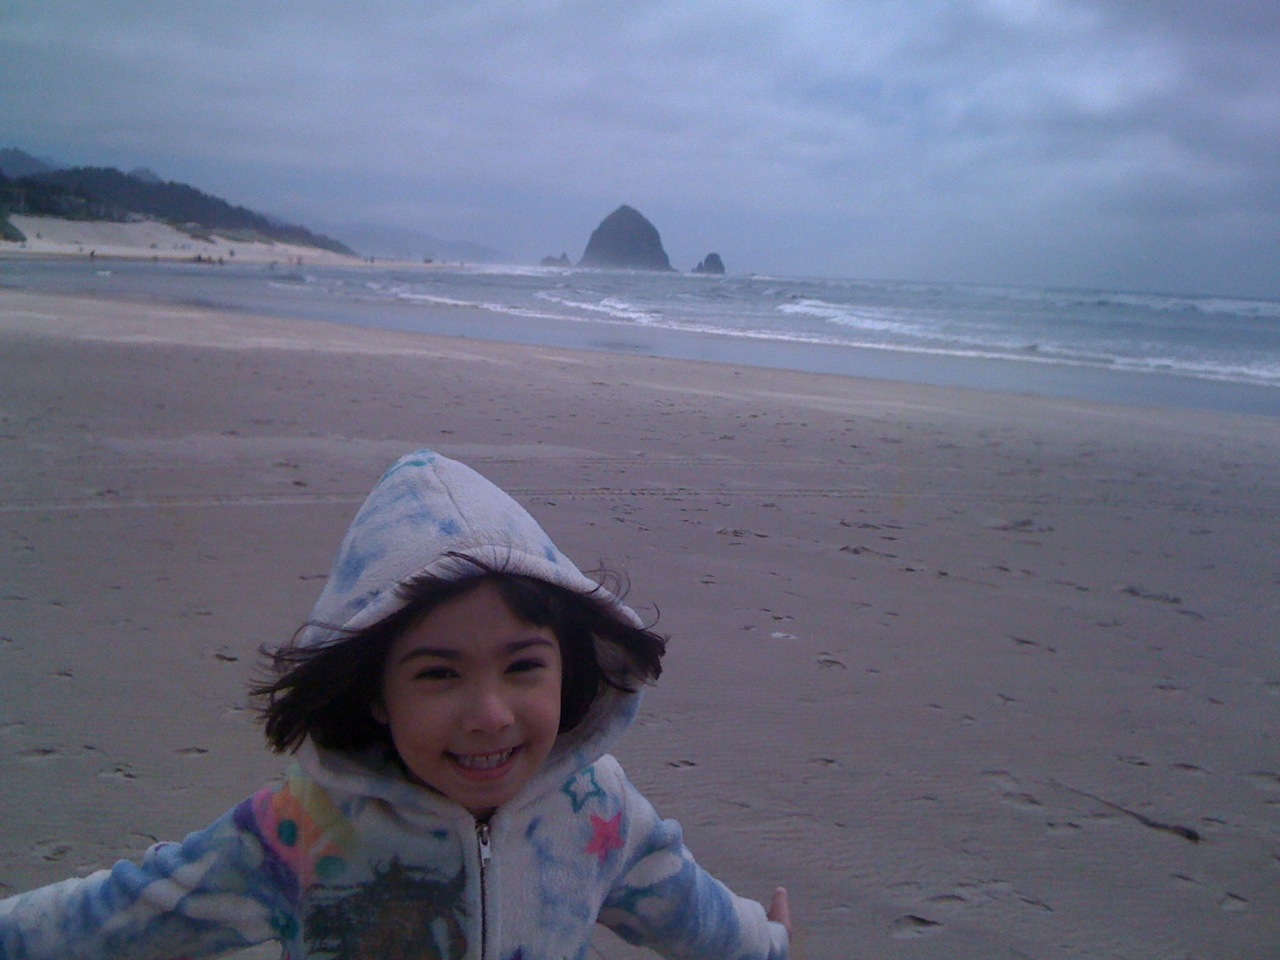 kidlet at cannon beach